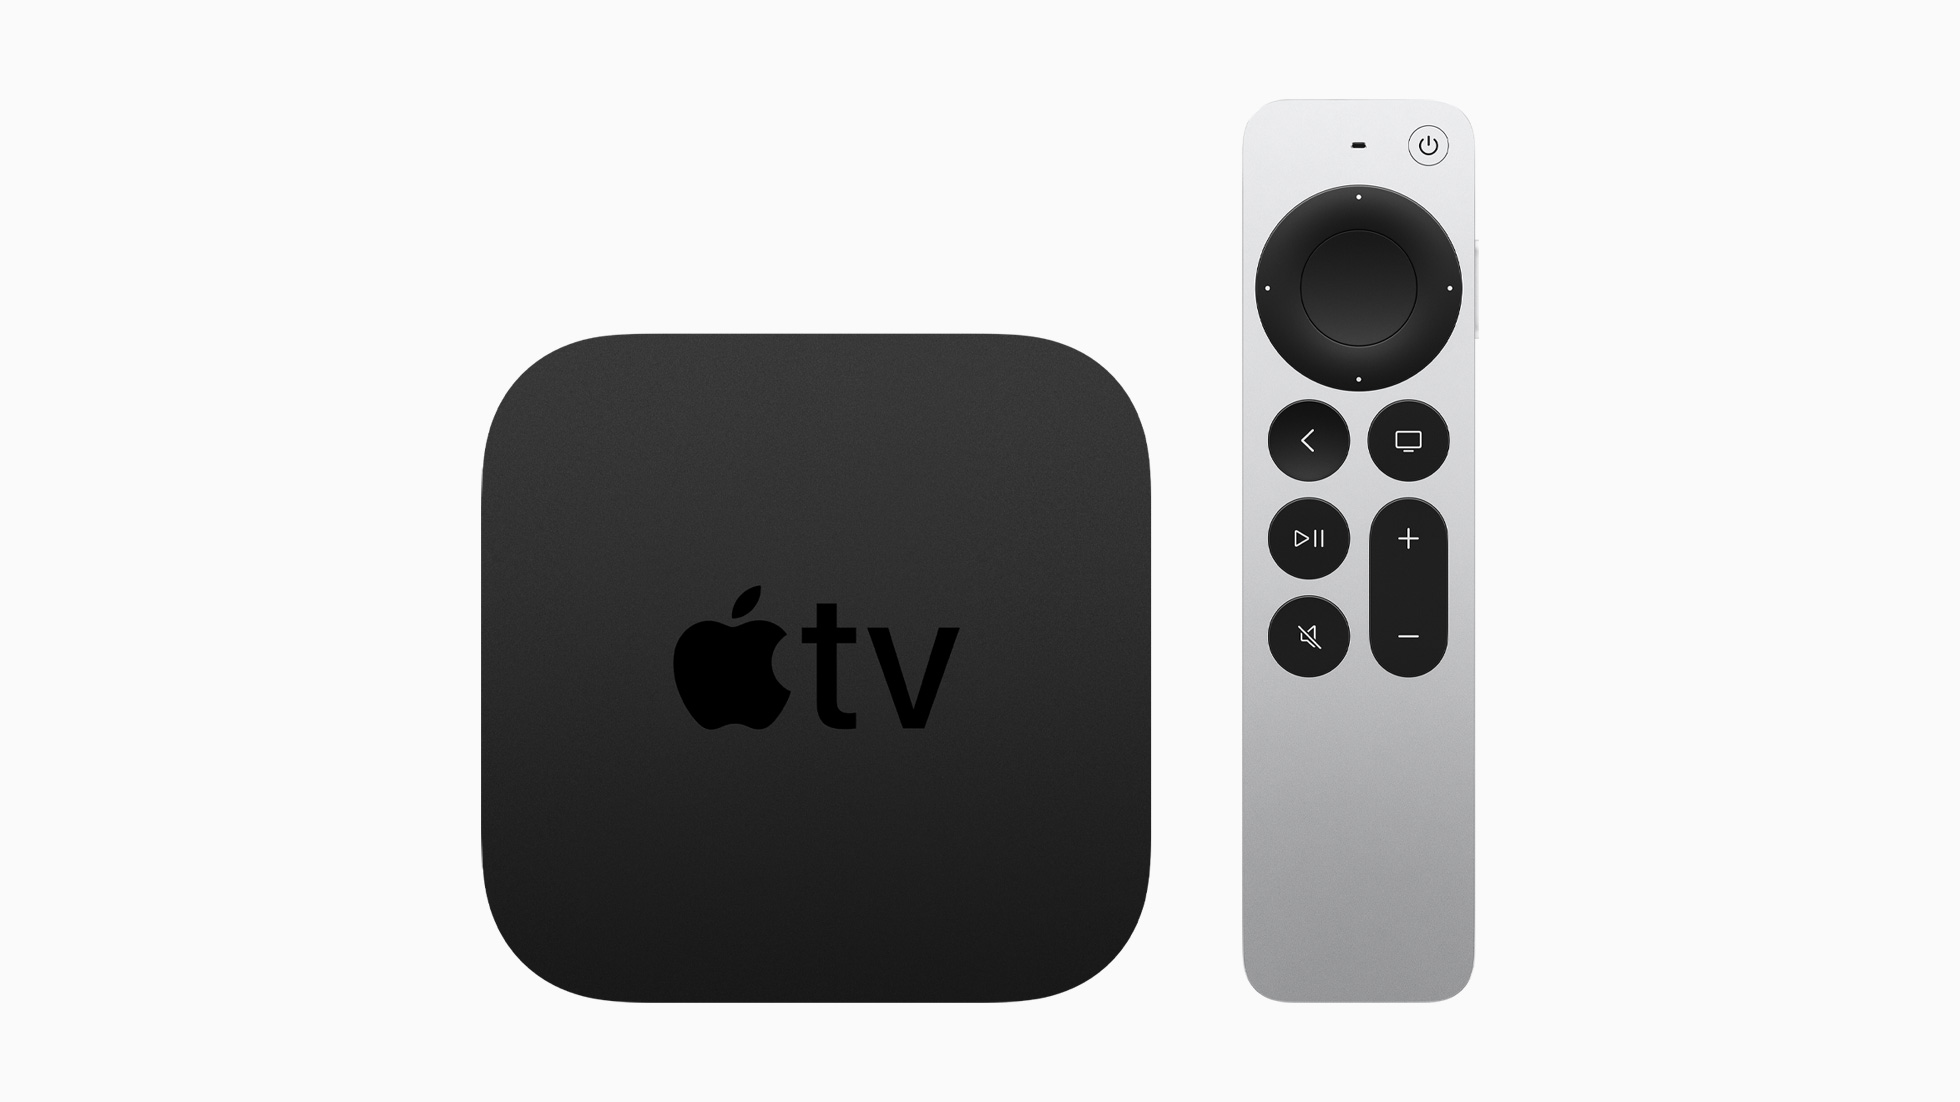 Apple announces Apple TV 4K and it gets a 120 Hz refresh rate The